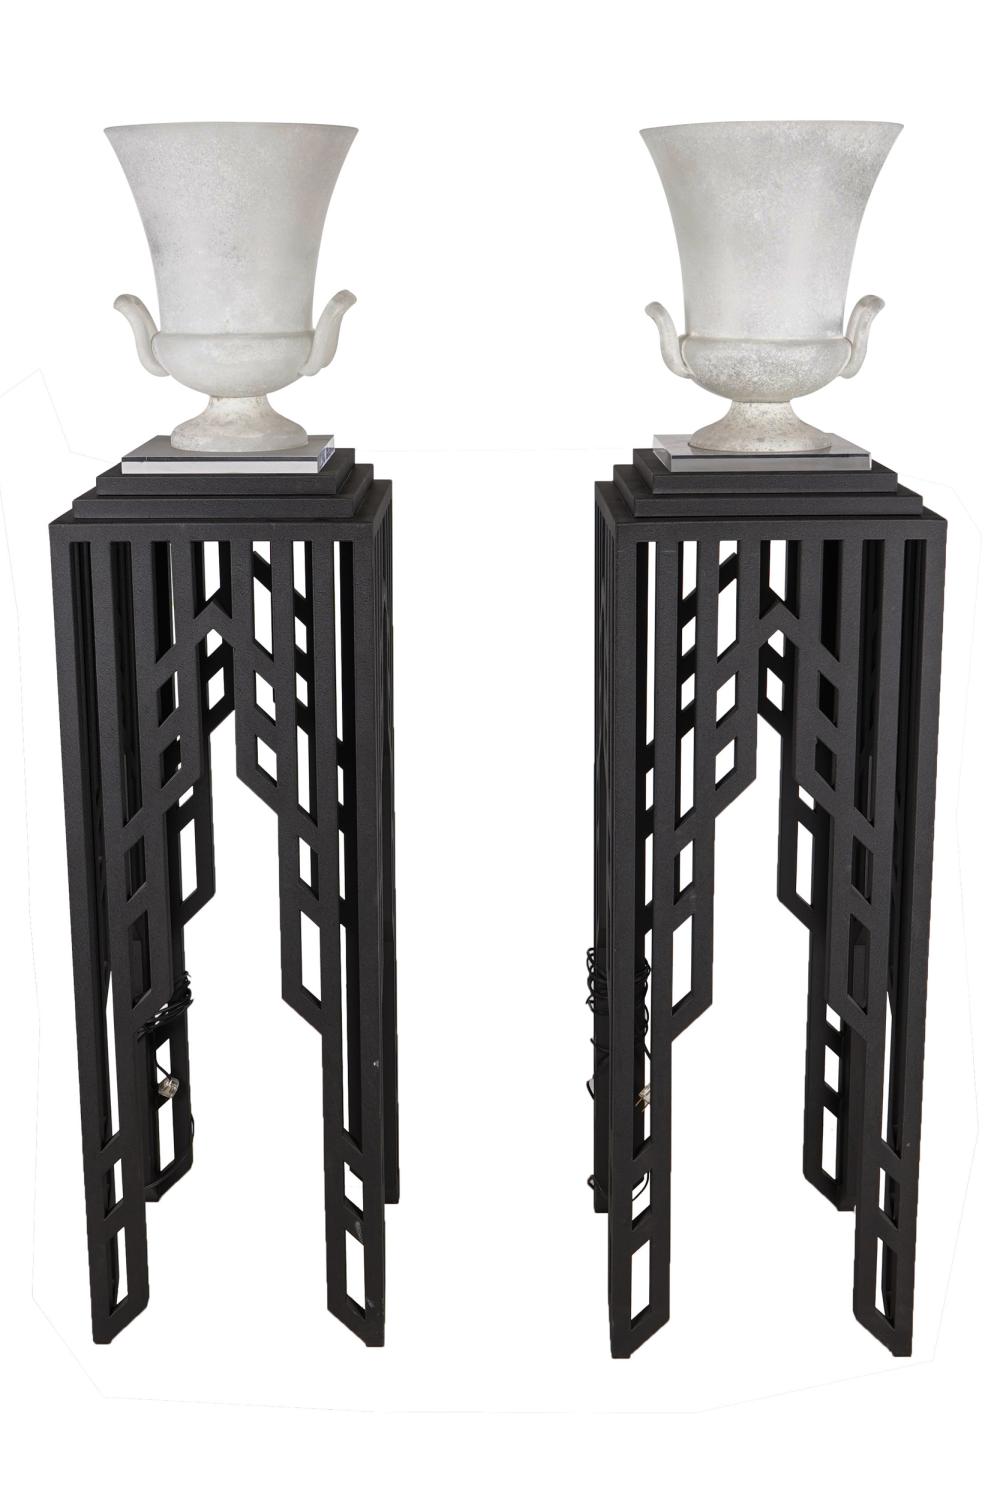 PAIR OF FROSTED GLASS URN FORM 3379f5